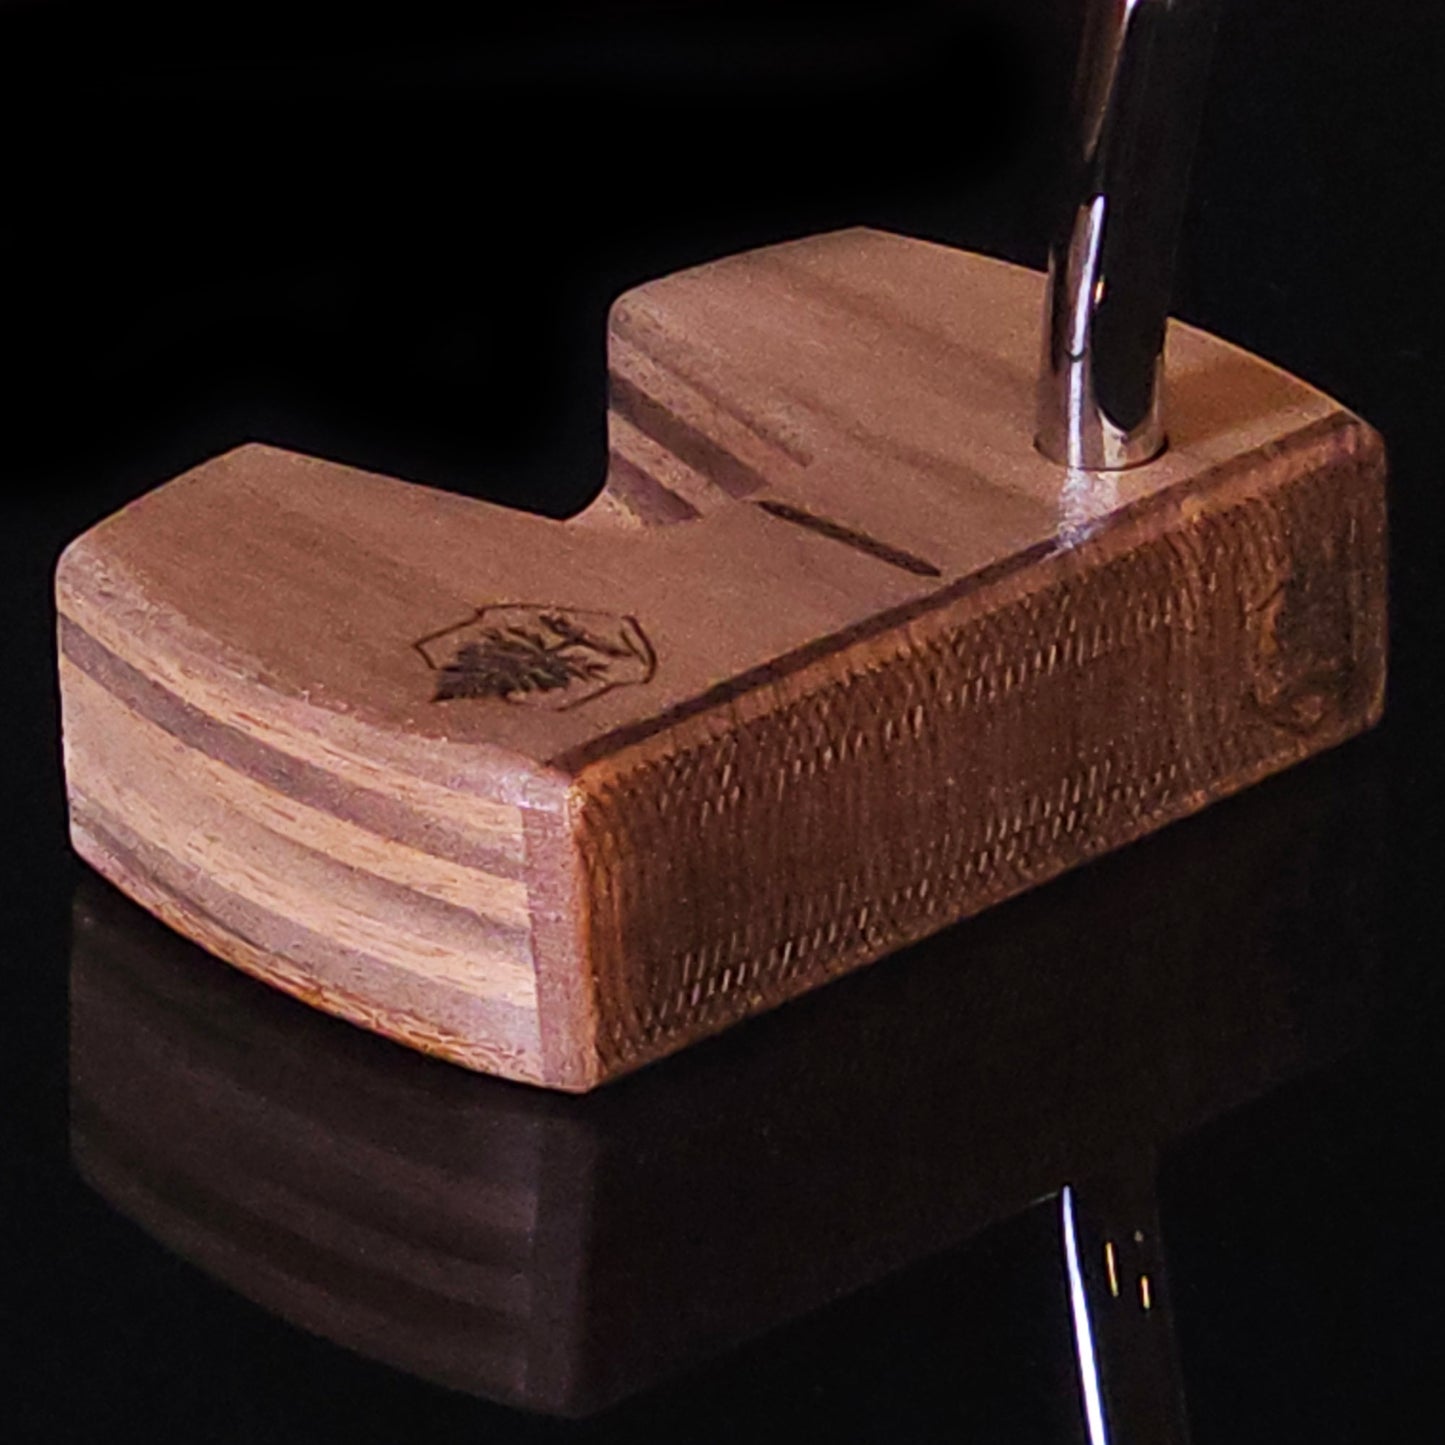 Walnut Bolivian Rosewood and Lacewood Woodrich Regal wood putter